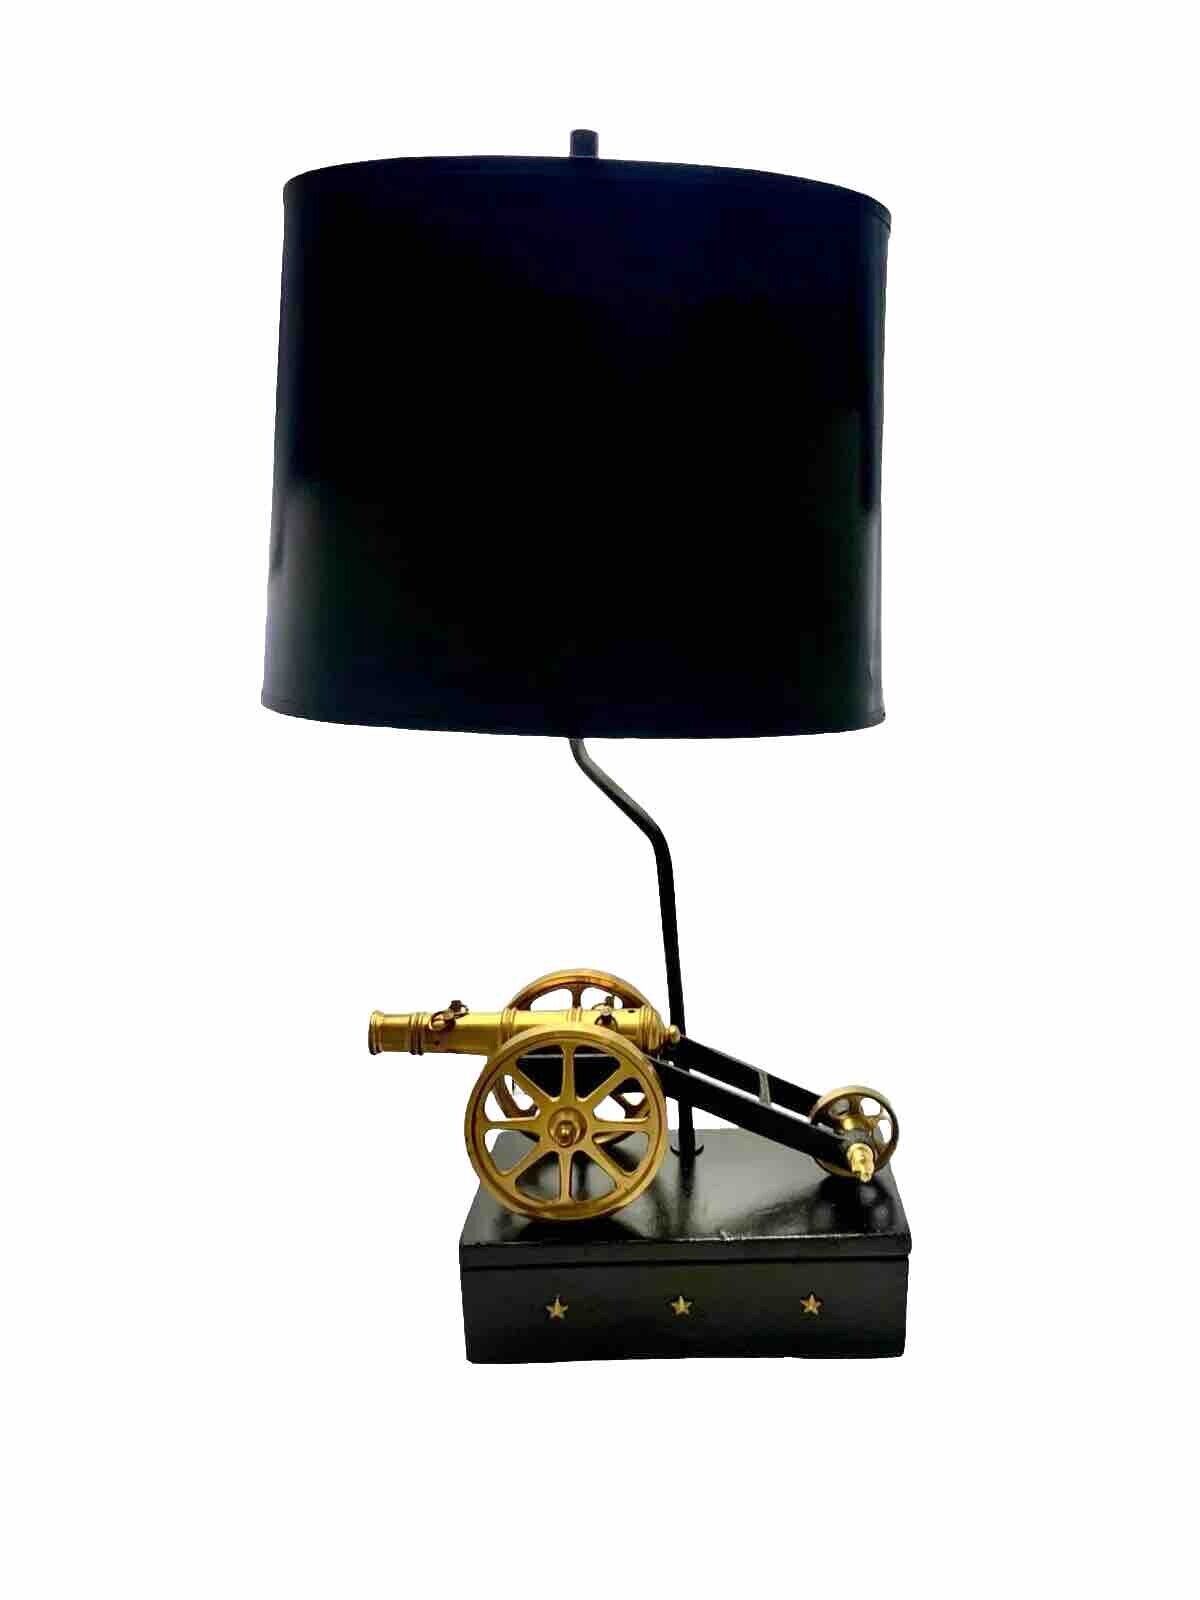 Cannon Lamp Brass on Heavy Base with Shade Vintage Table Desk Office Decor